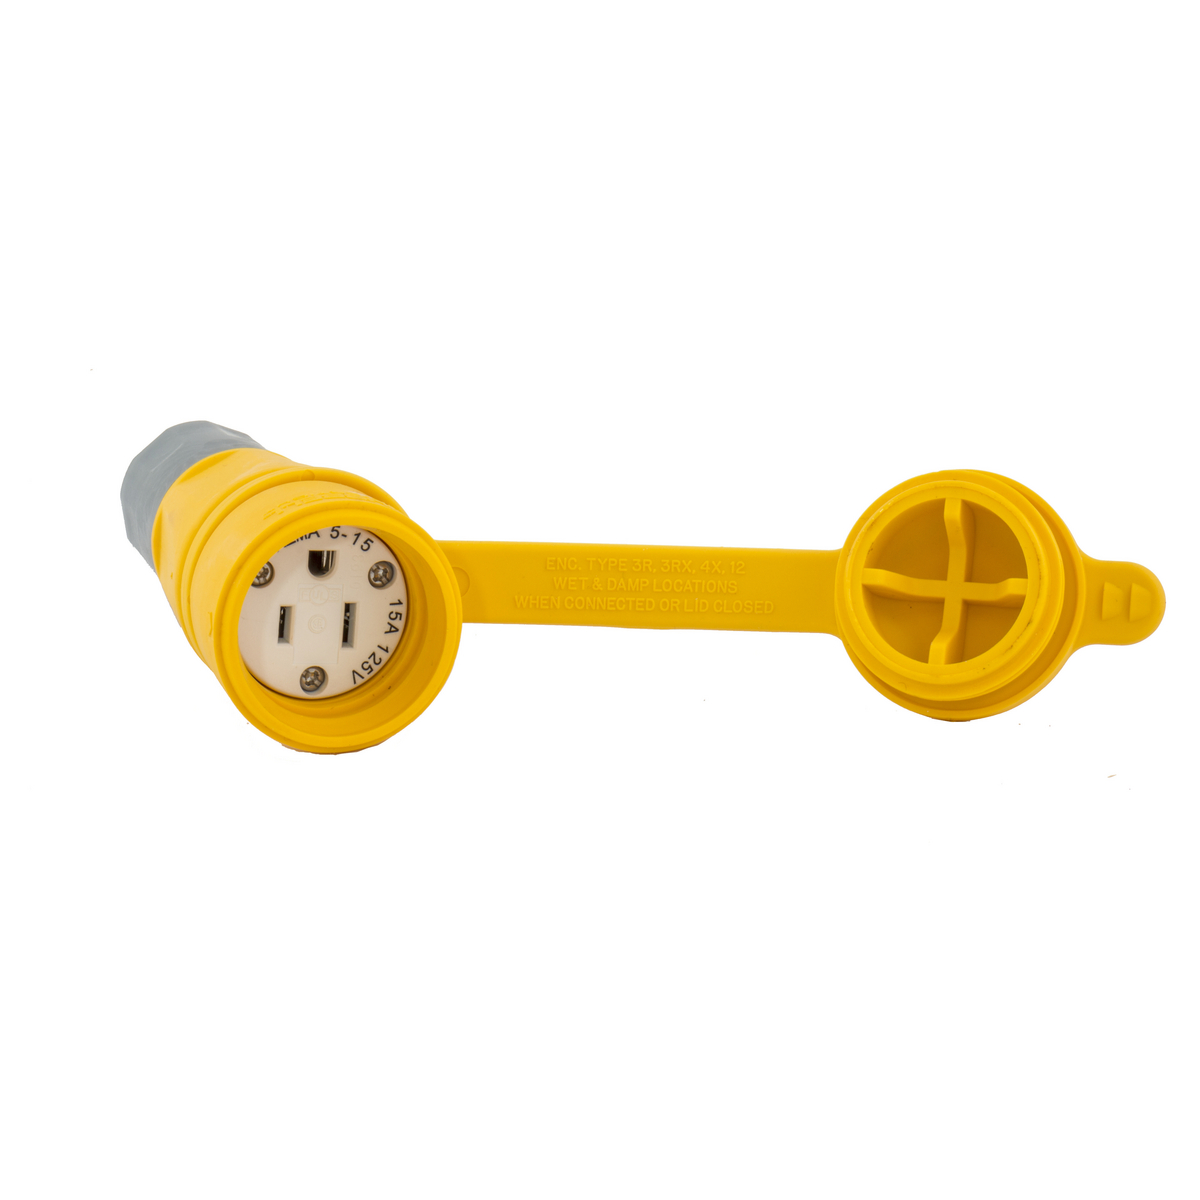 Hubbell ELASTOGRIP Watertight Female Connector Body # HBL15W47 125v for sale online 